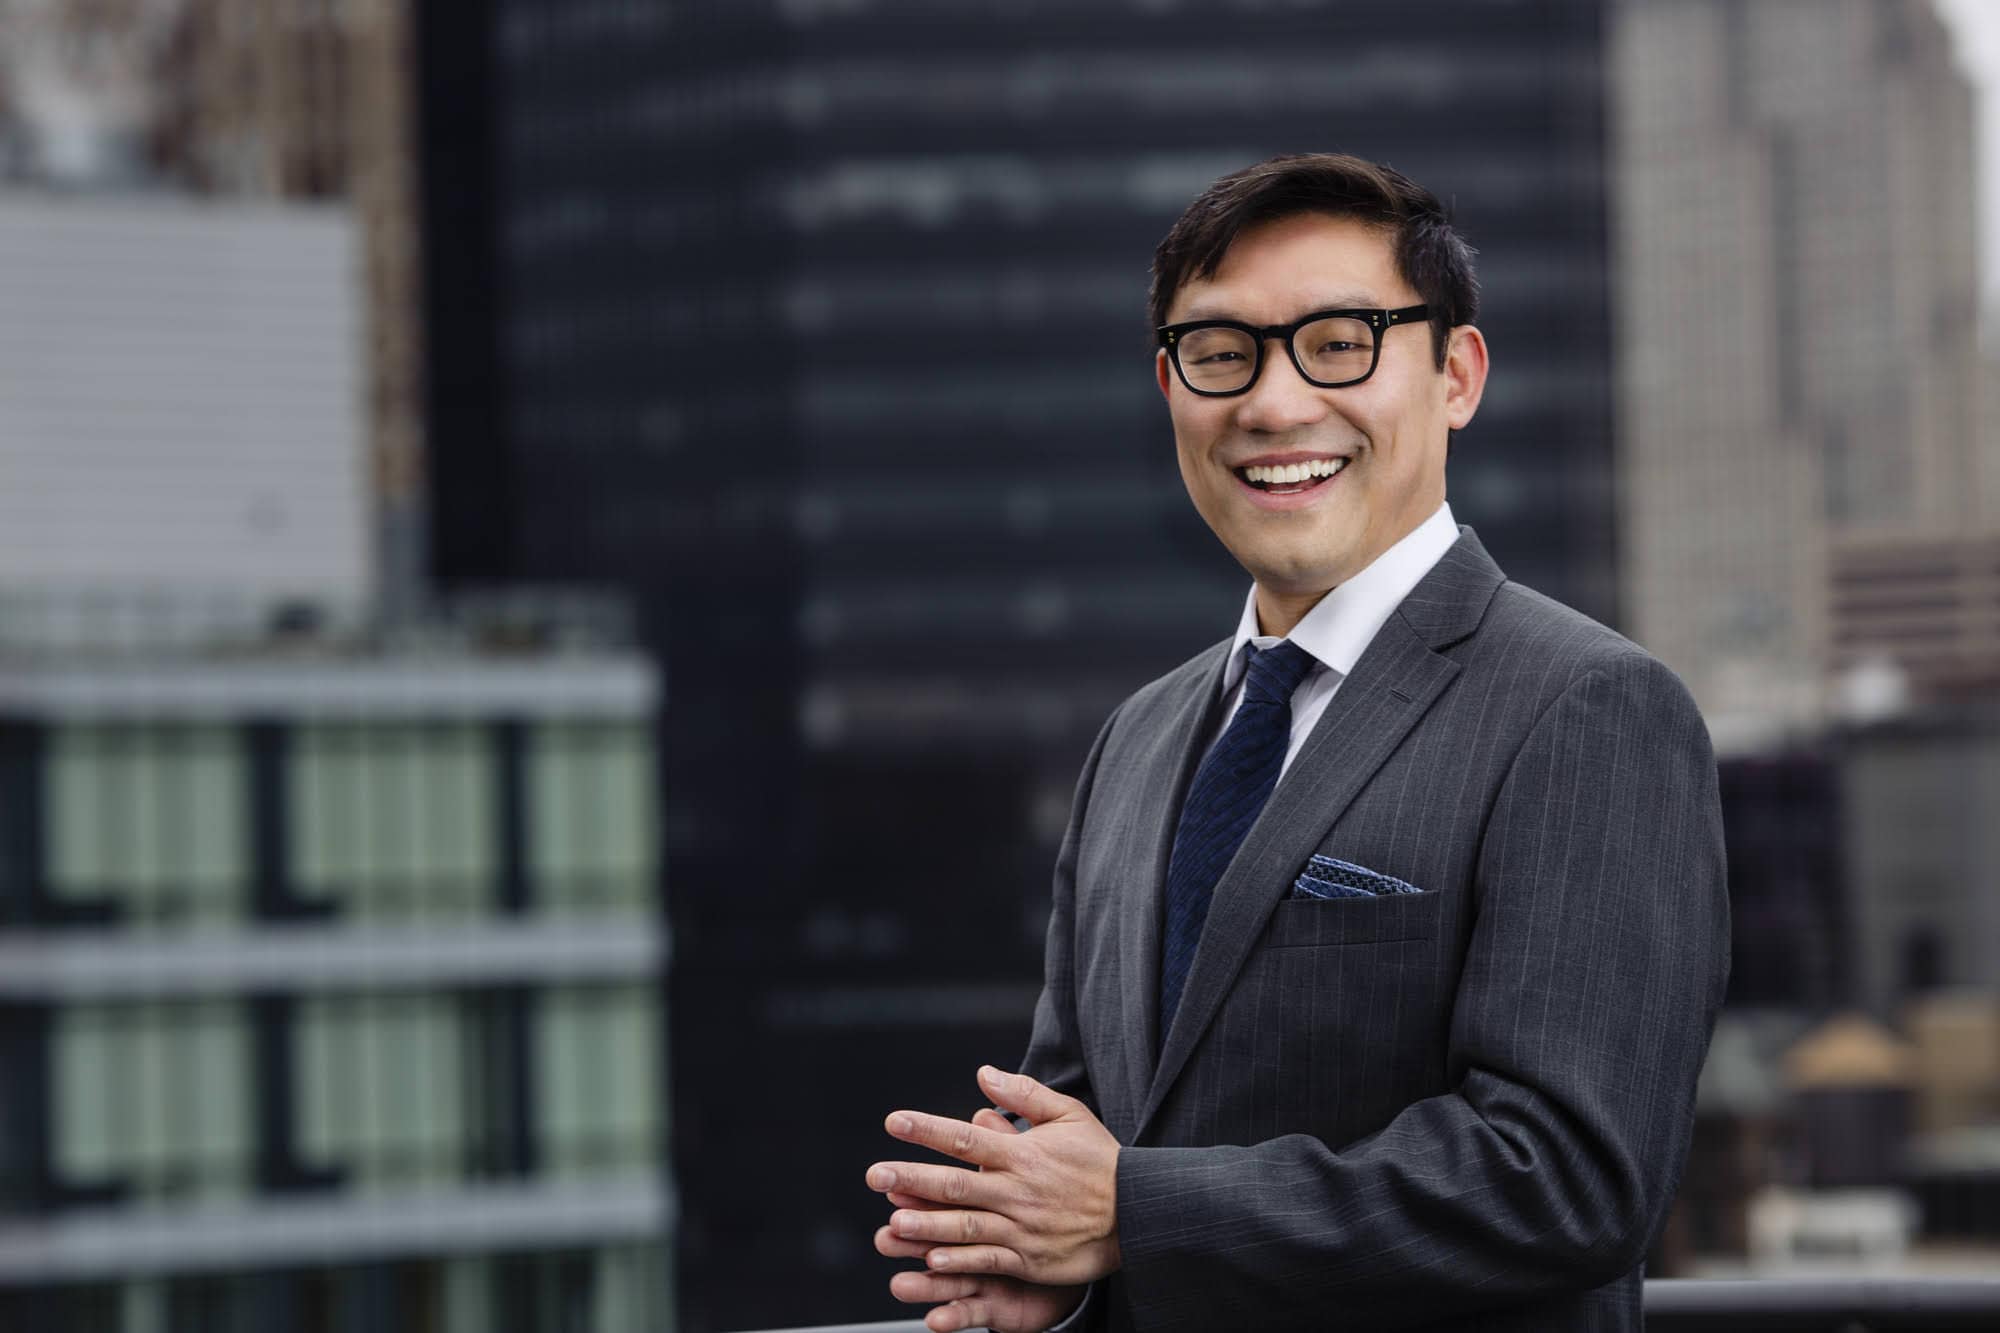 Outdoor corporate headshot in New York City, cityscape background.